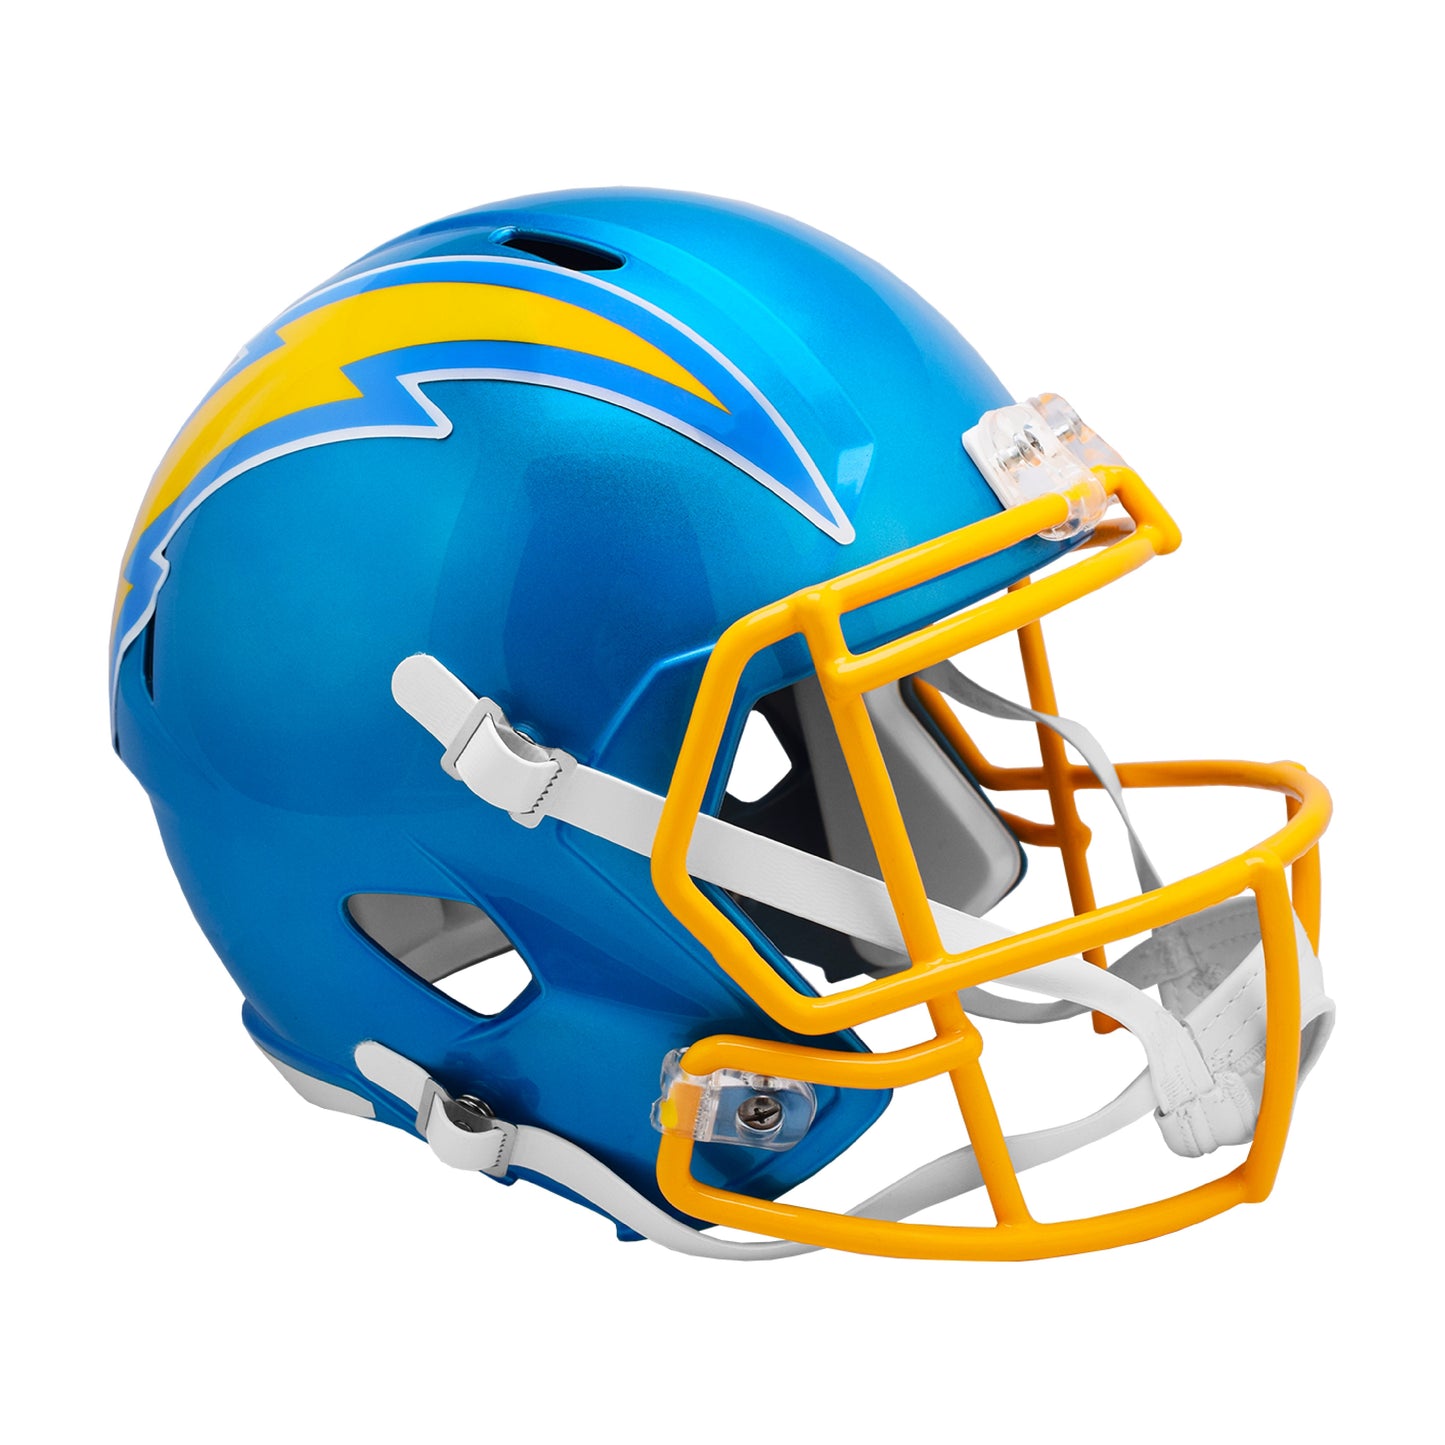 Los Angeles Chargers FLASH Full Size Replica Football Helmet